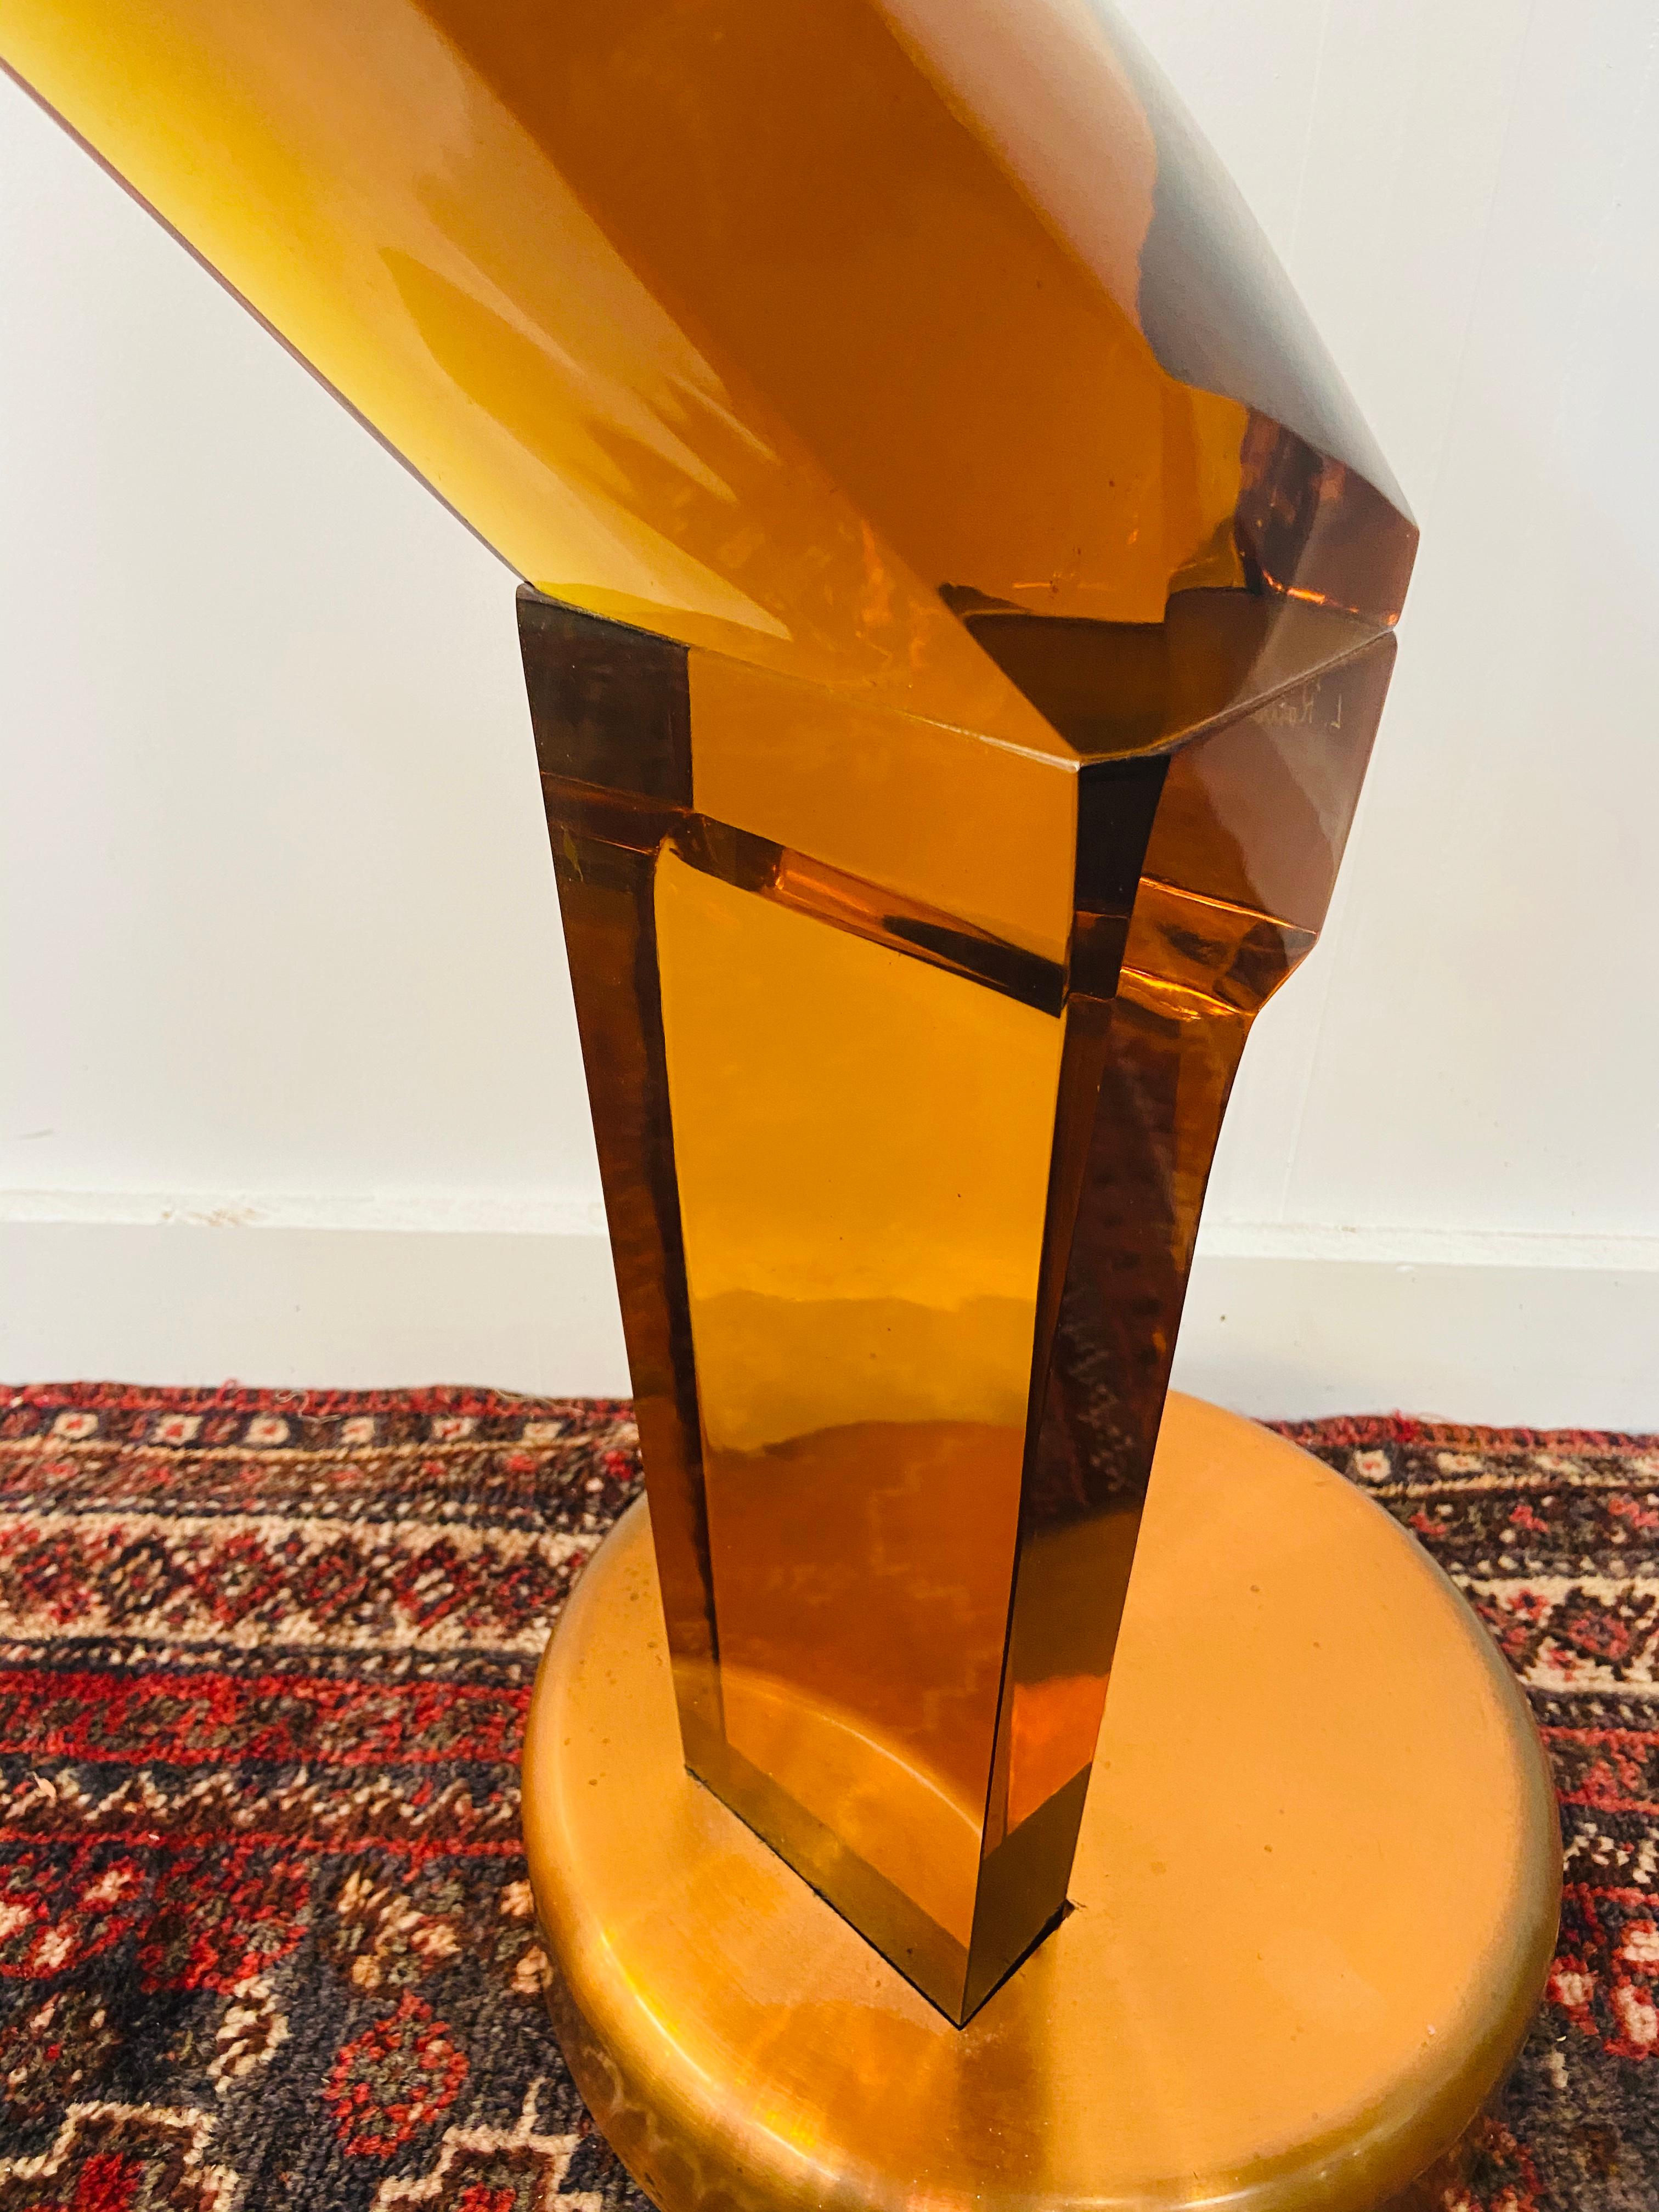 Rare Large Murano Art Glass Sculpture by Maestro Loredano Rosin, Signed In Good Condition For Sale In Plainview, NY